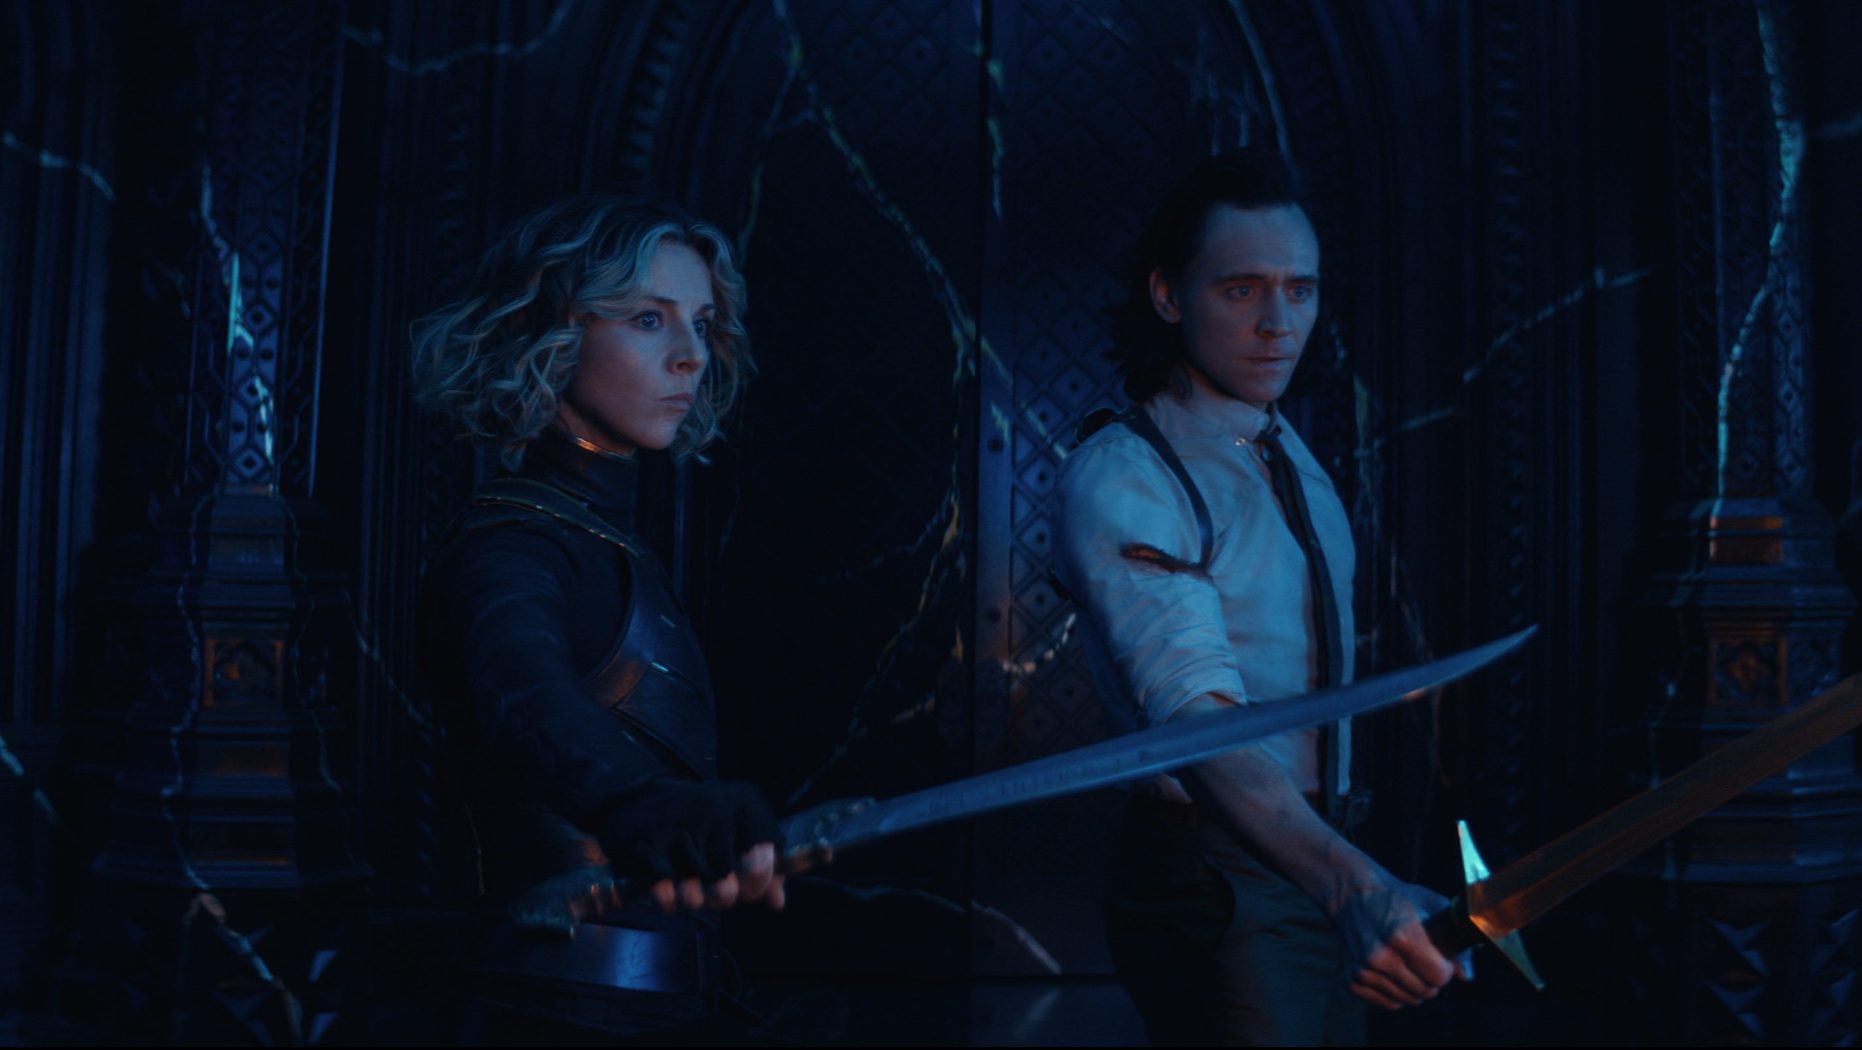 Loki (Tom Hiddleston) and Sylvie (Sophia Di Martino) holding out knives and learning who's behind the TVA, leaving questions for Season 2 of this TV series